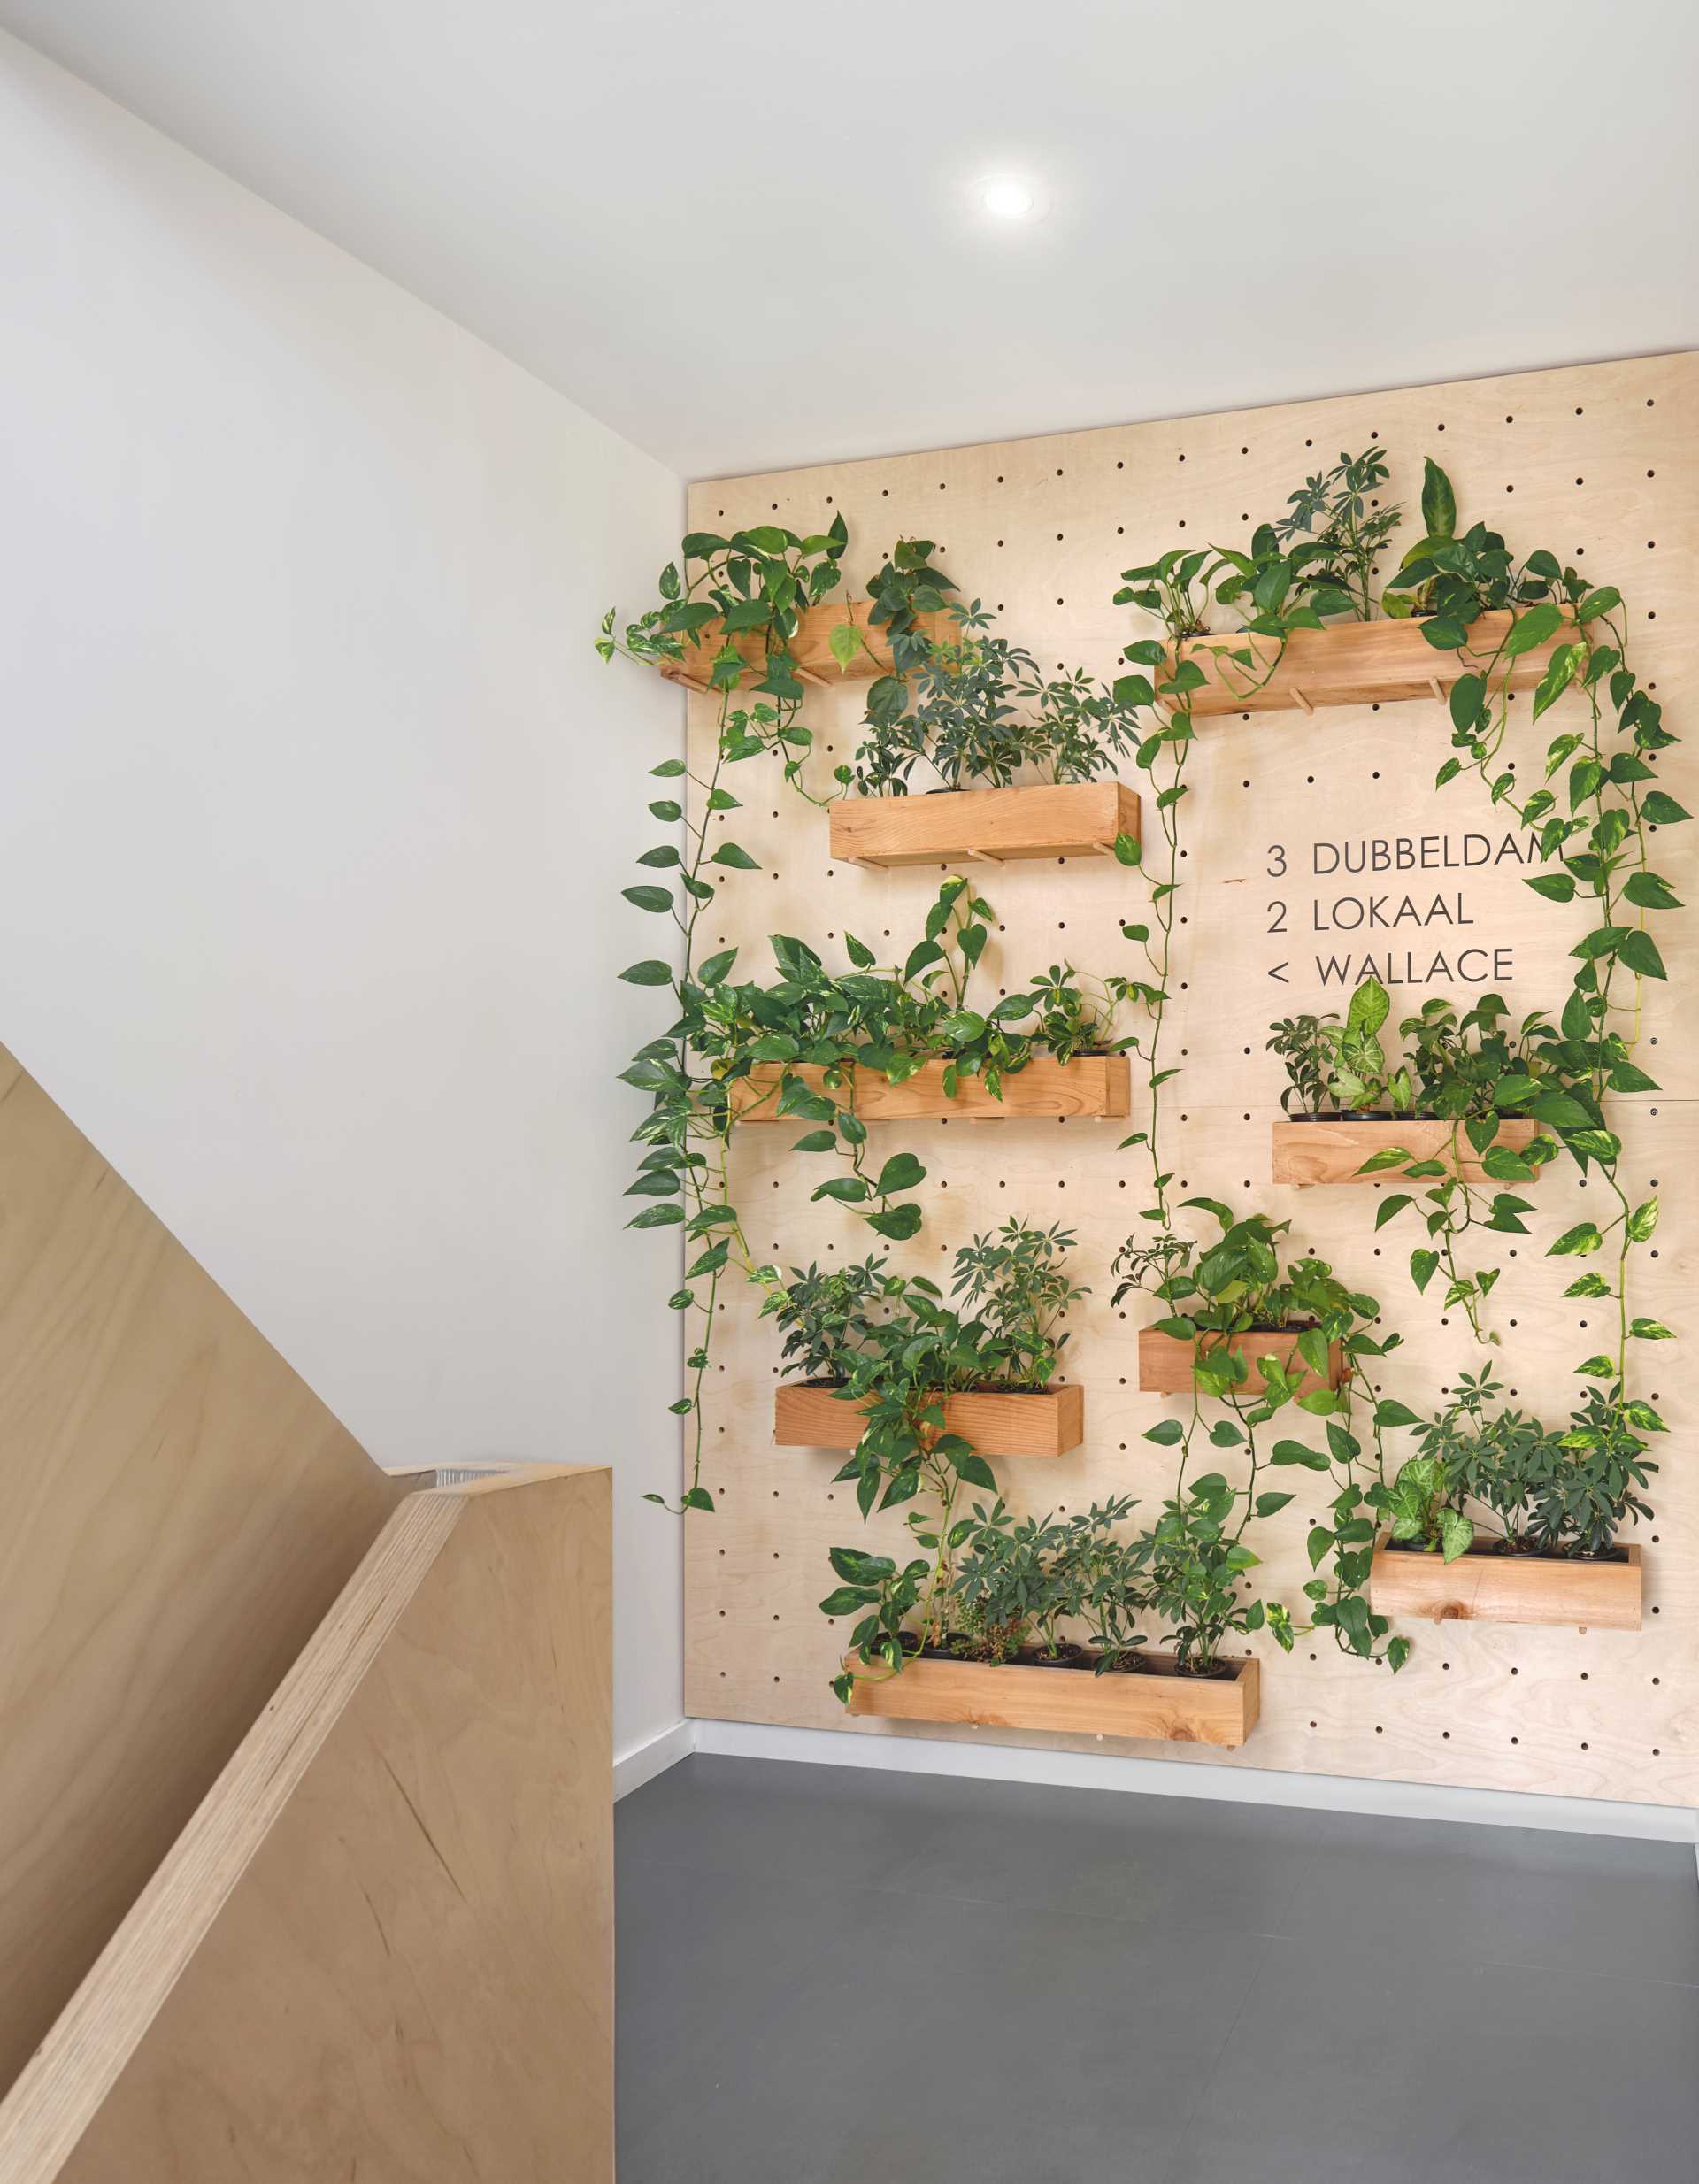 A custom Baltic birch pegboard panel on the first-floor landing not only provides a director for the businesses in the building but also doubles as a thriving green wall populated with lush plants in fragrant cedar boxes.